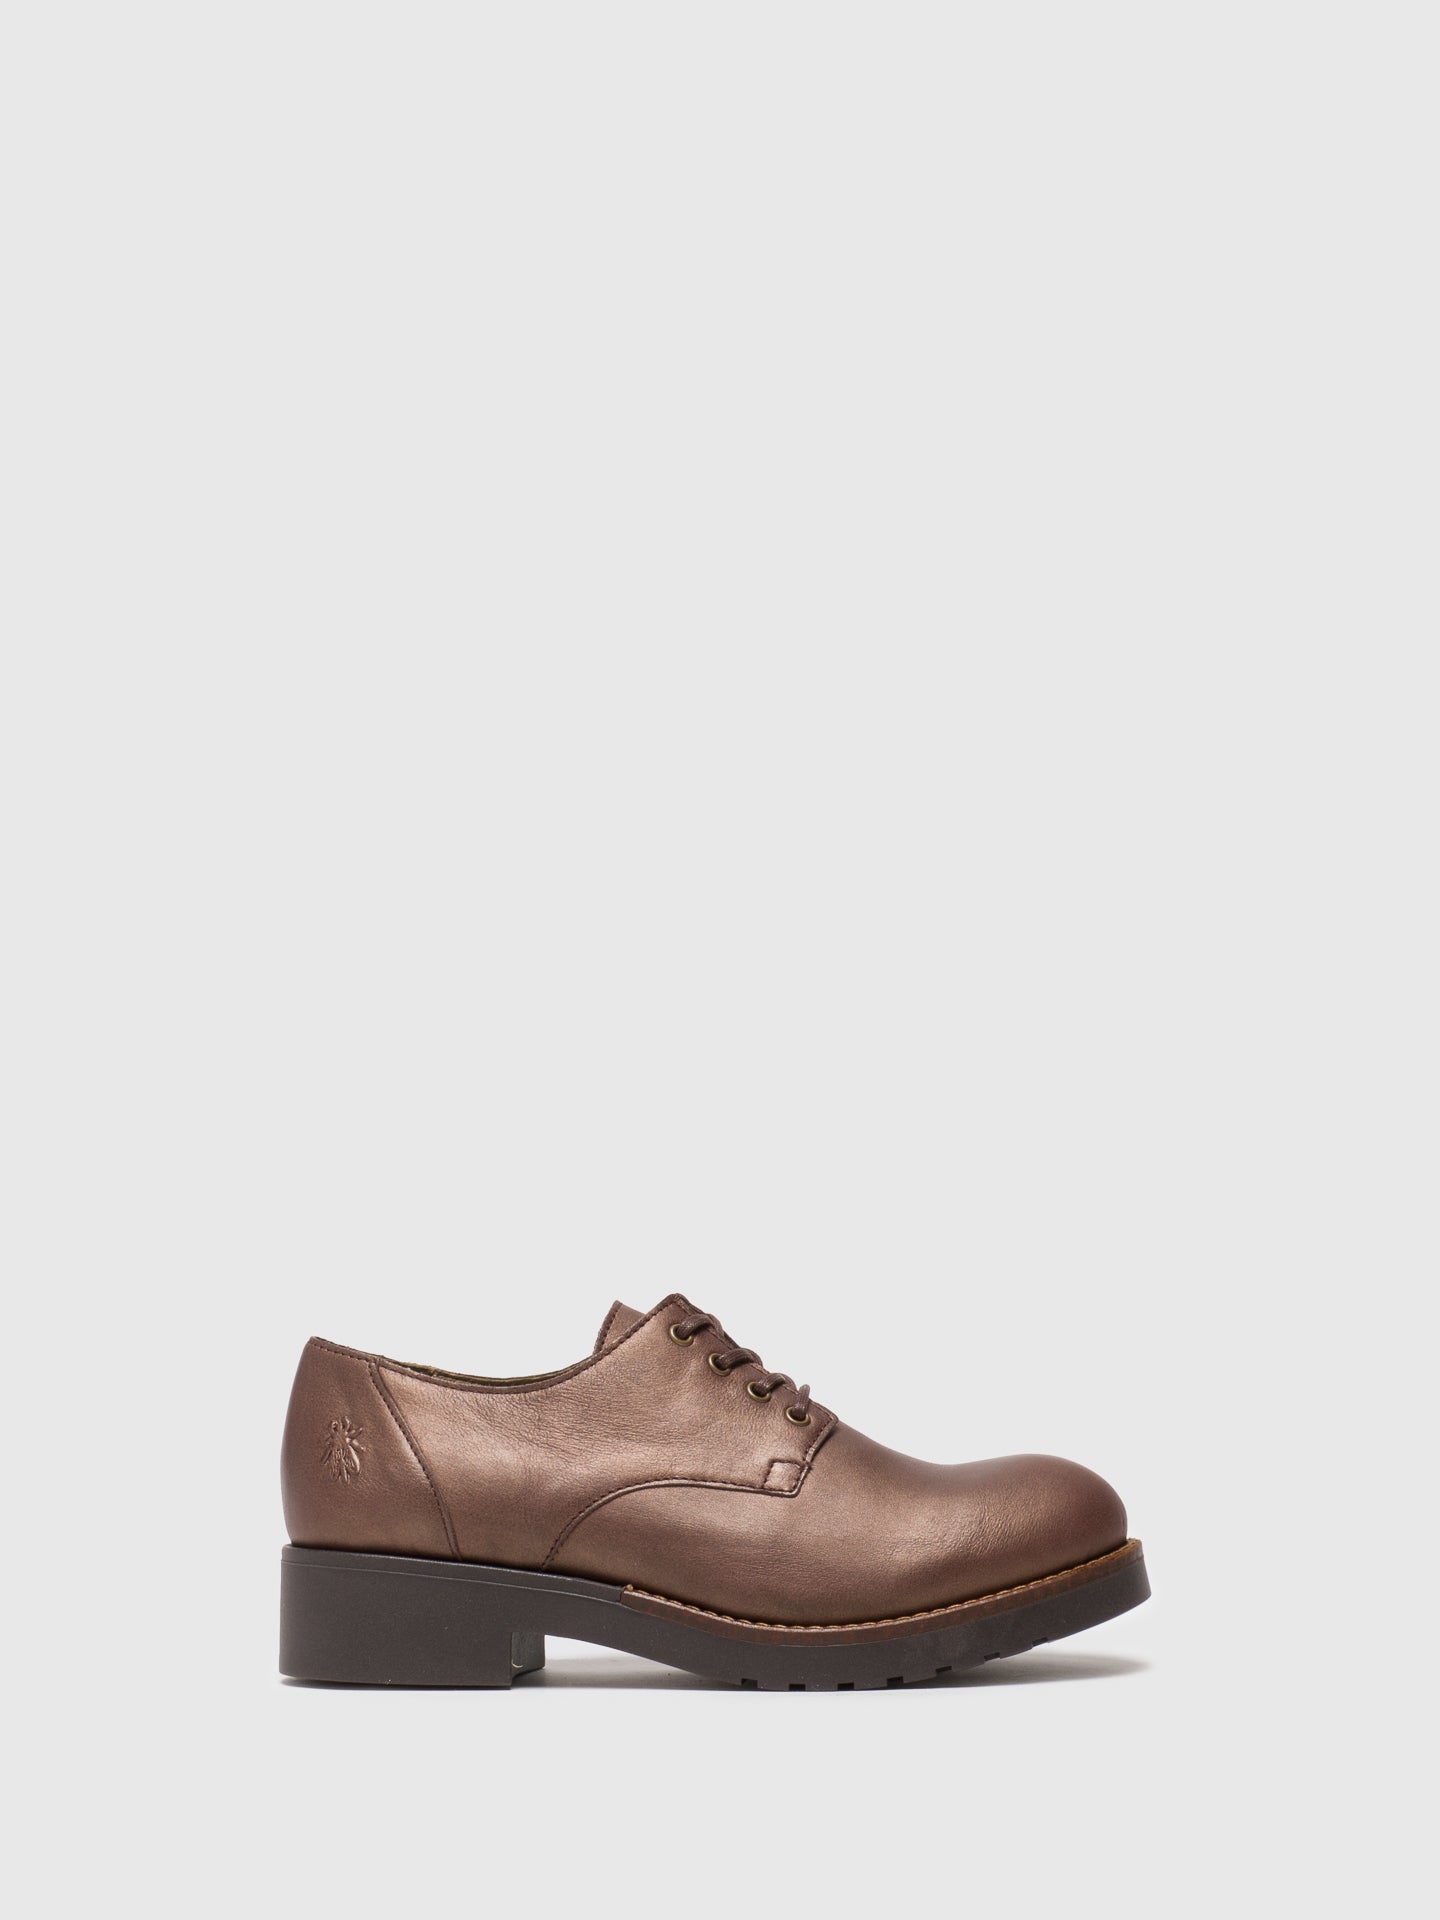 Fly London Brown Lace-up Shoes